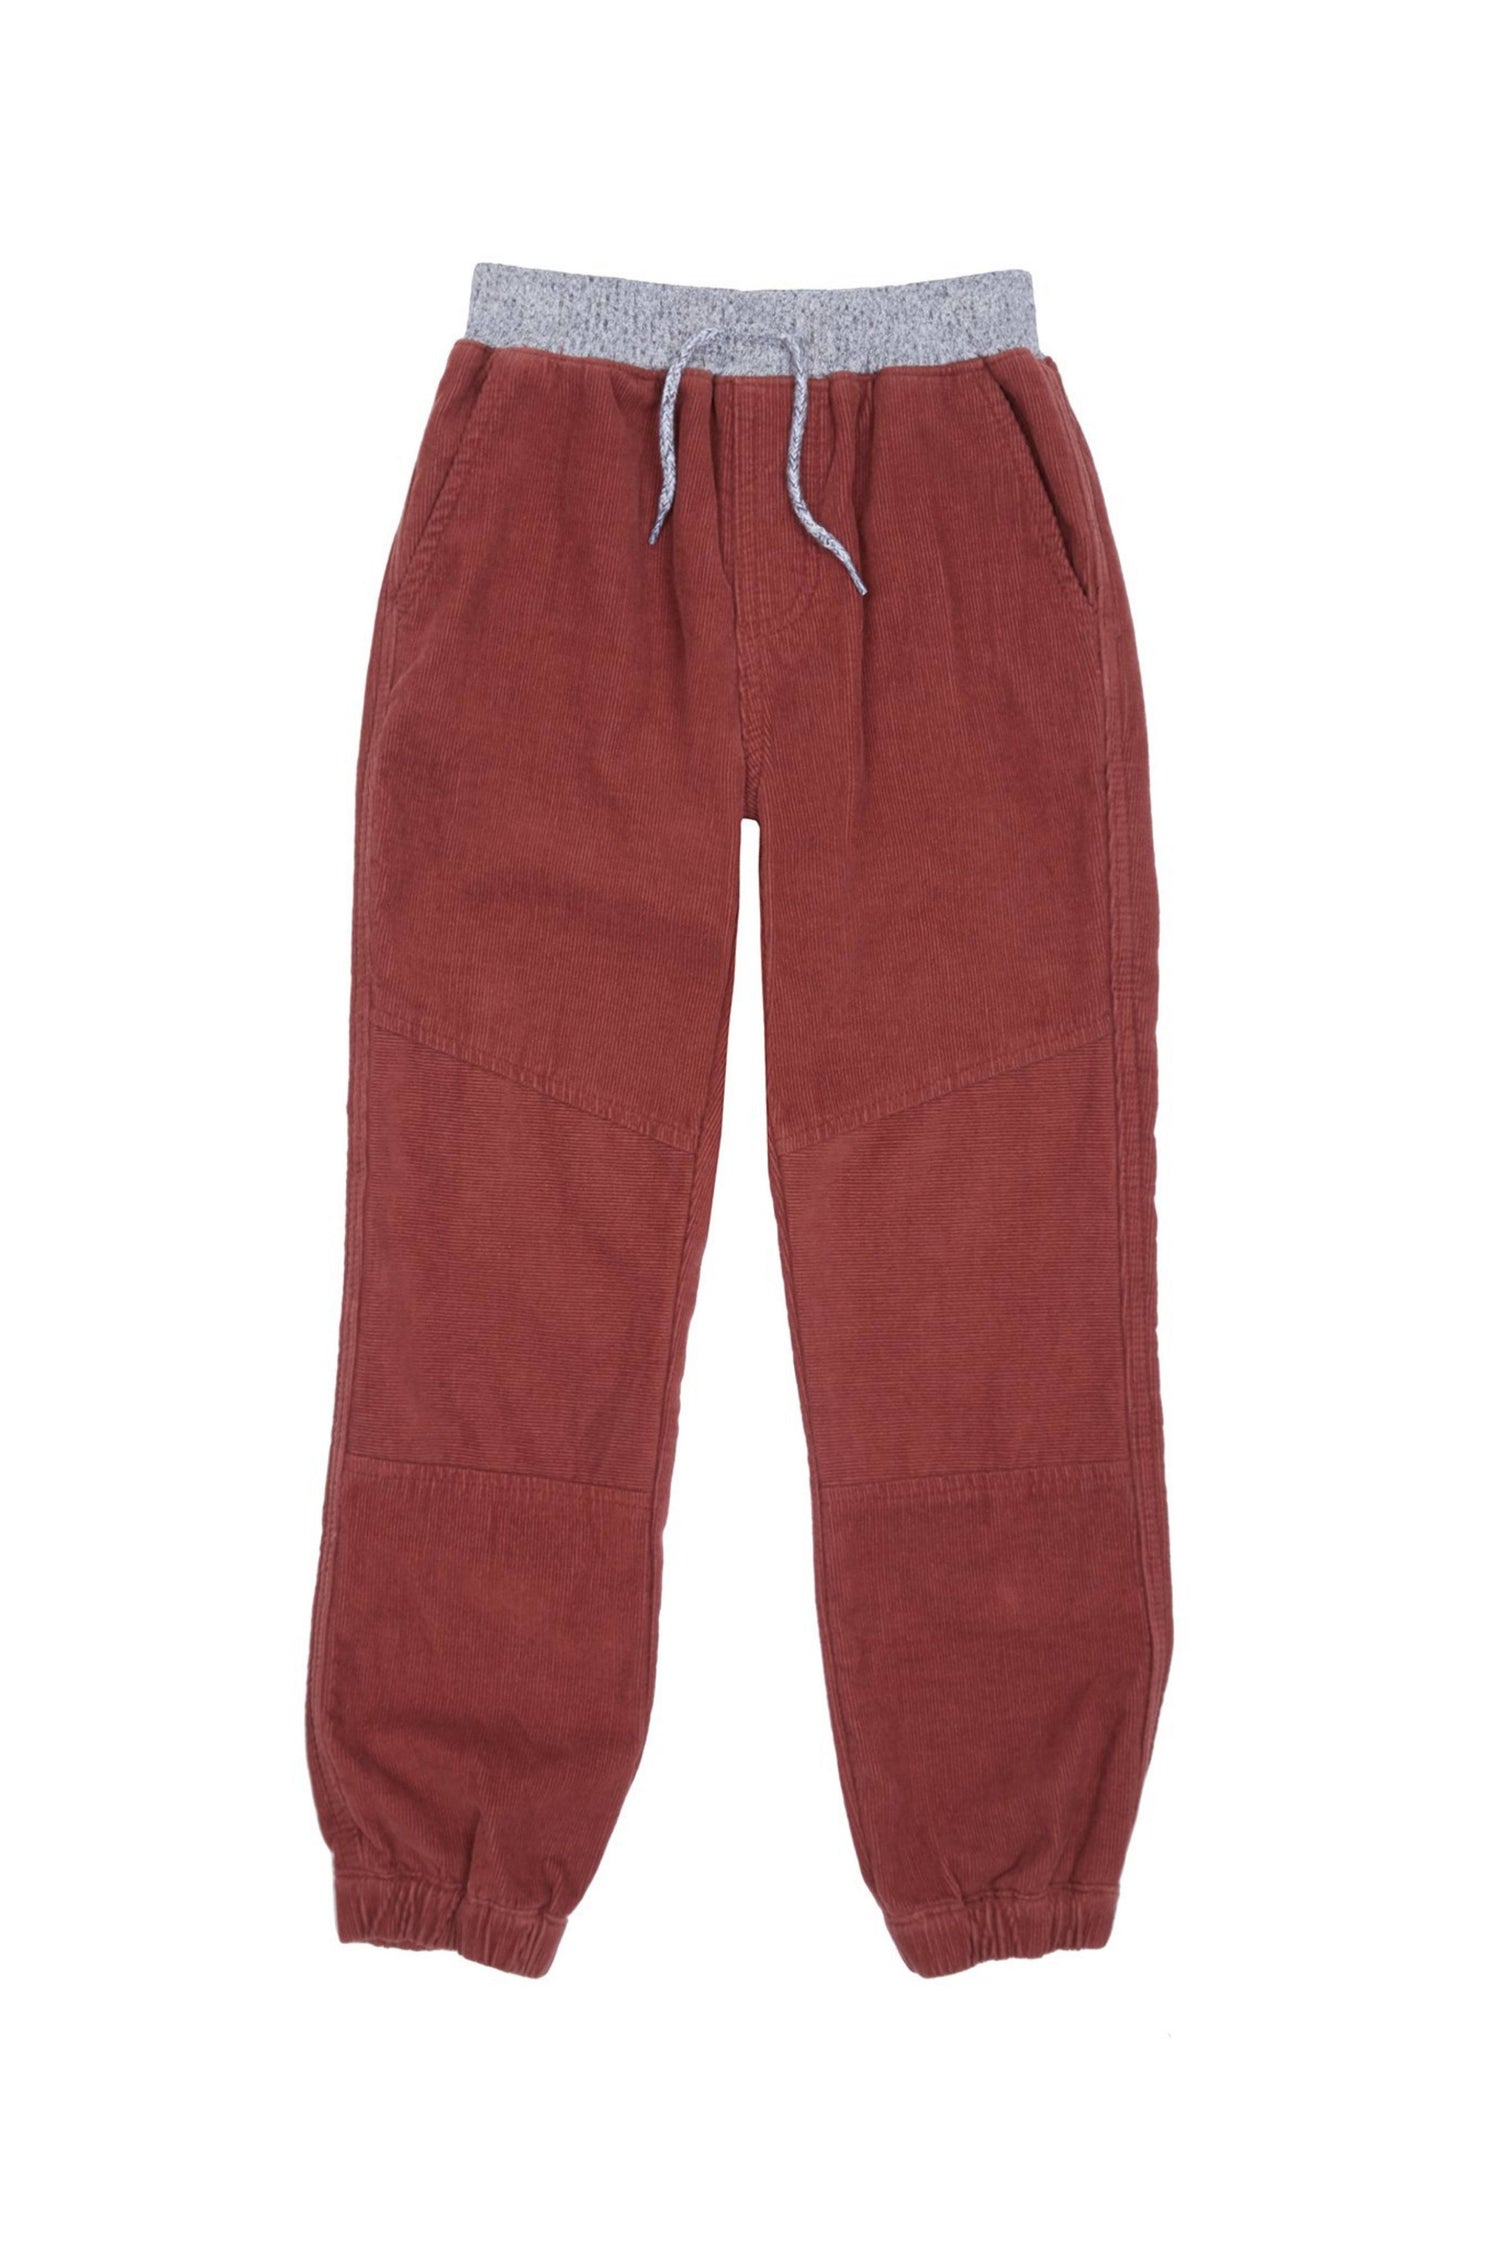 Brown corduroy jogger with gray elastic waist and faux drawstring. 